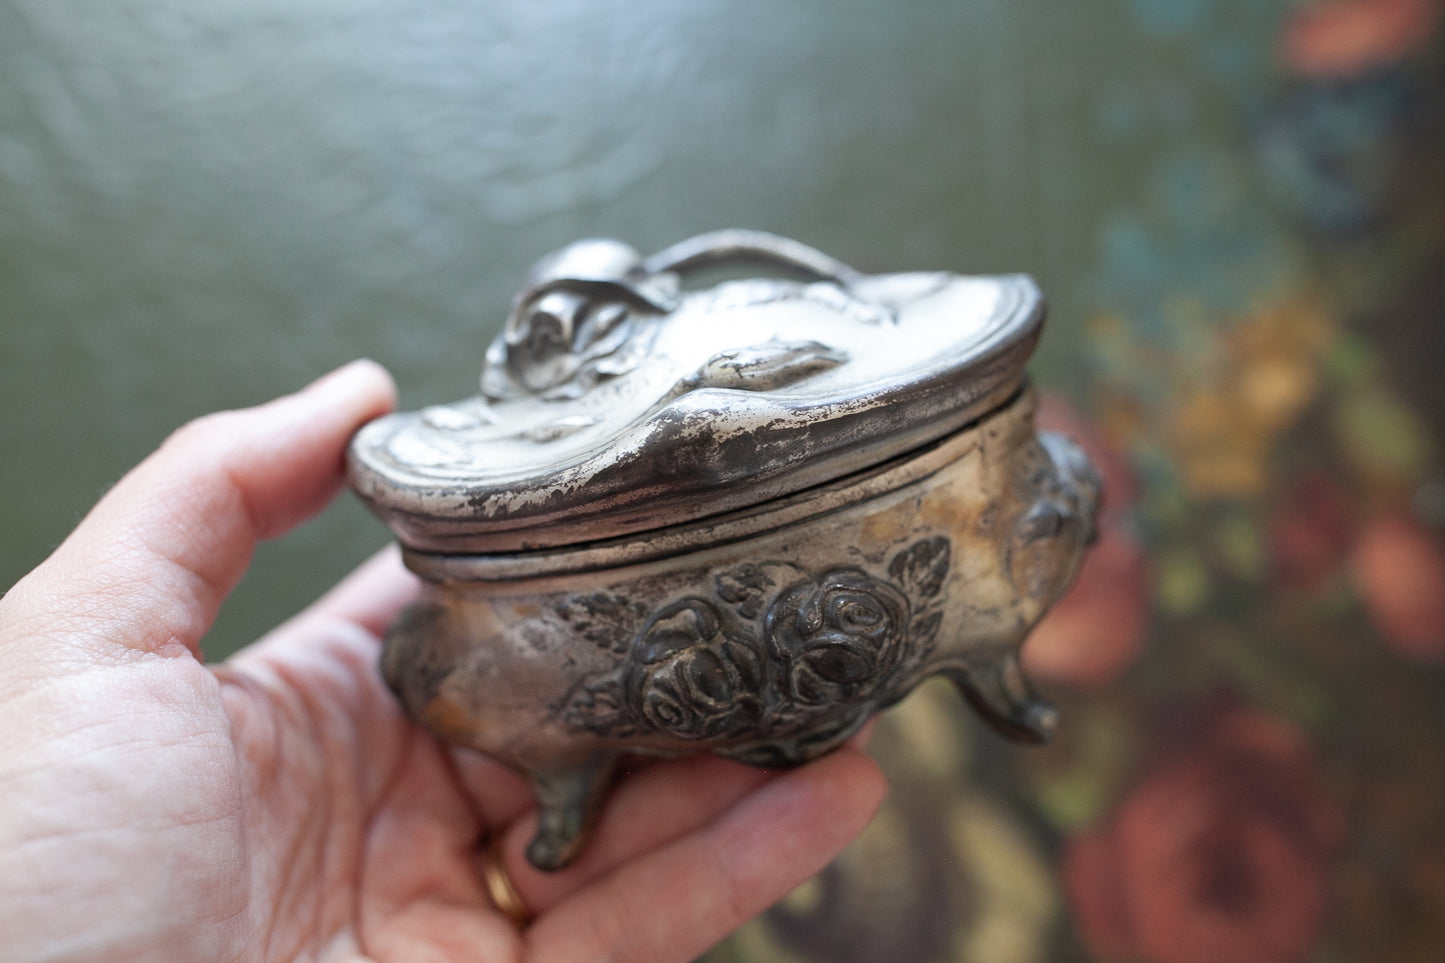 Vintage Silver Jewelry Trinket Ring Oval Box with Ornate Top, Art Nouveau